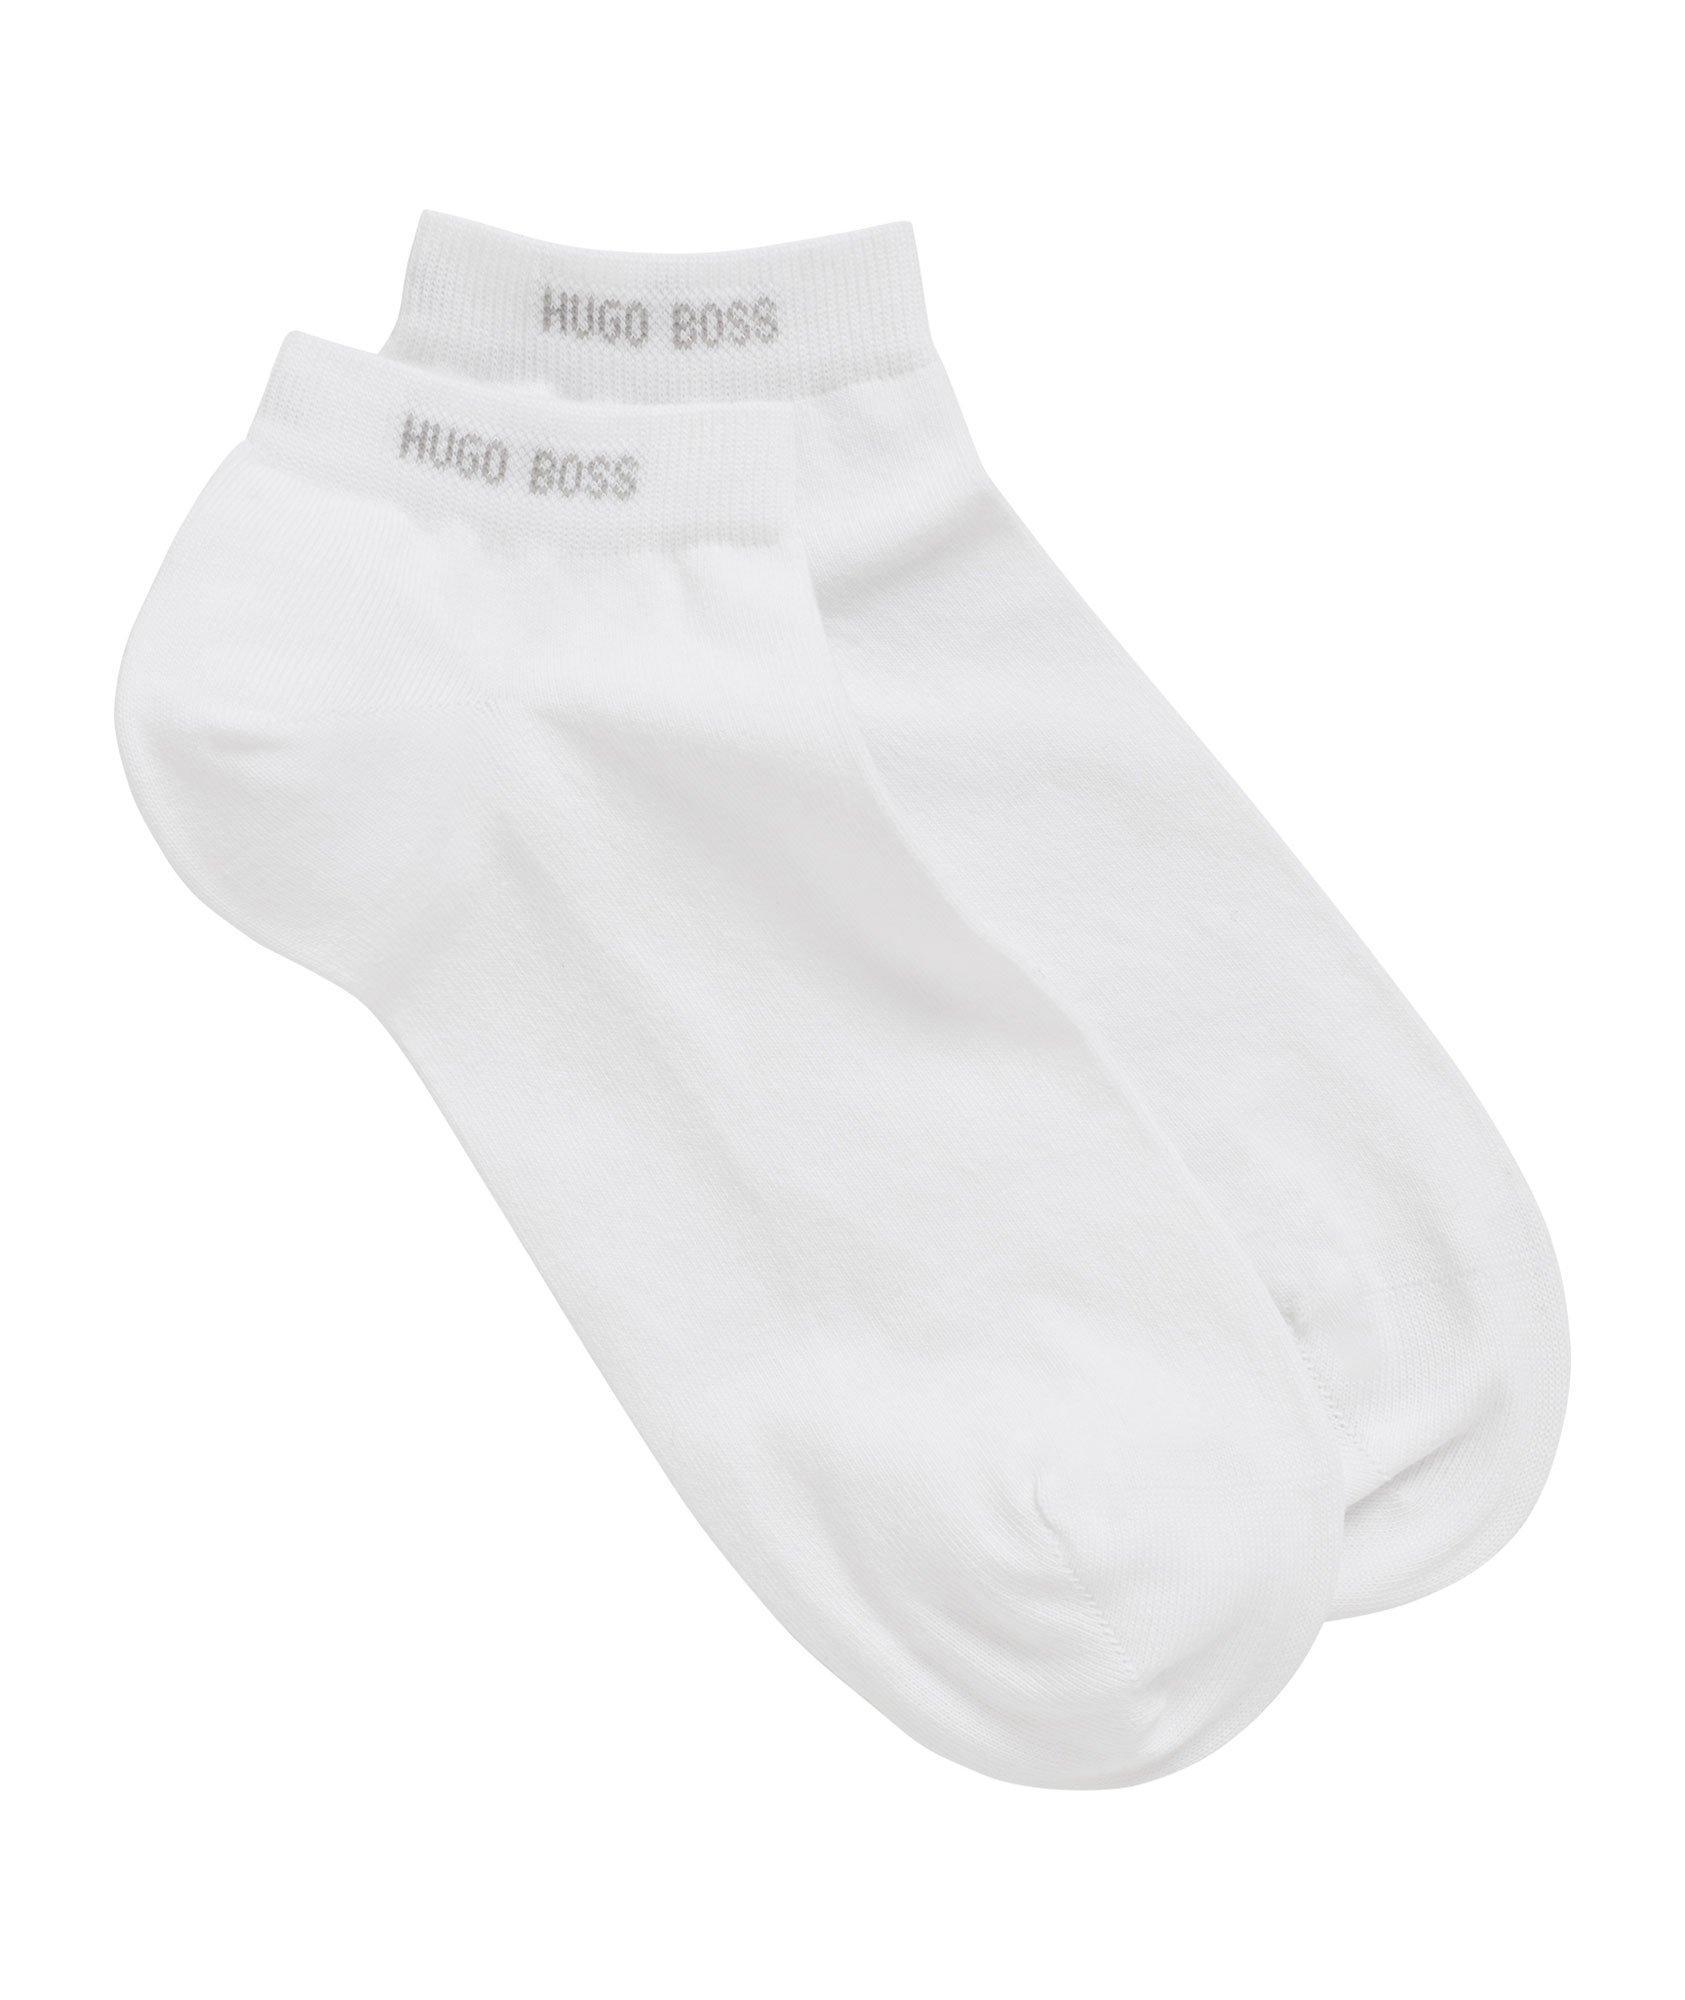 2-Pack Stretch-Cotton Ankle Socks image 0